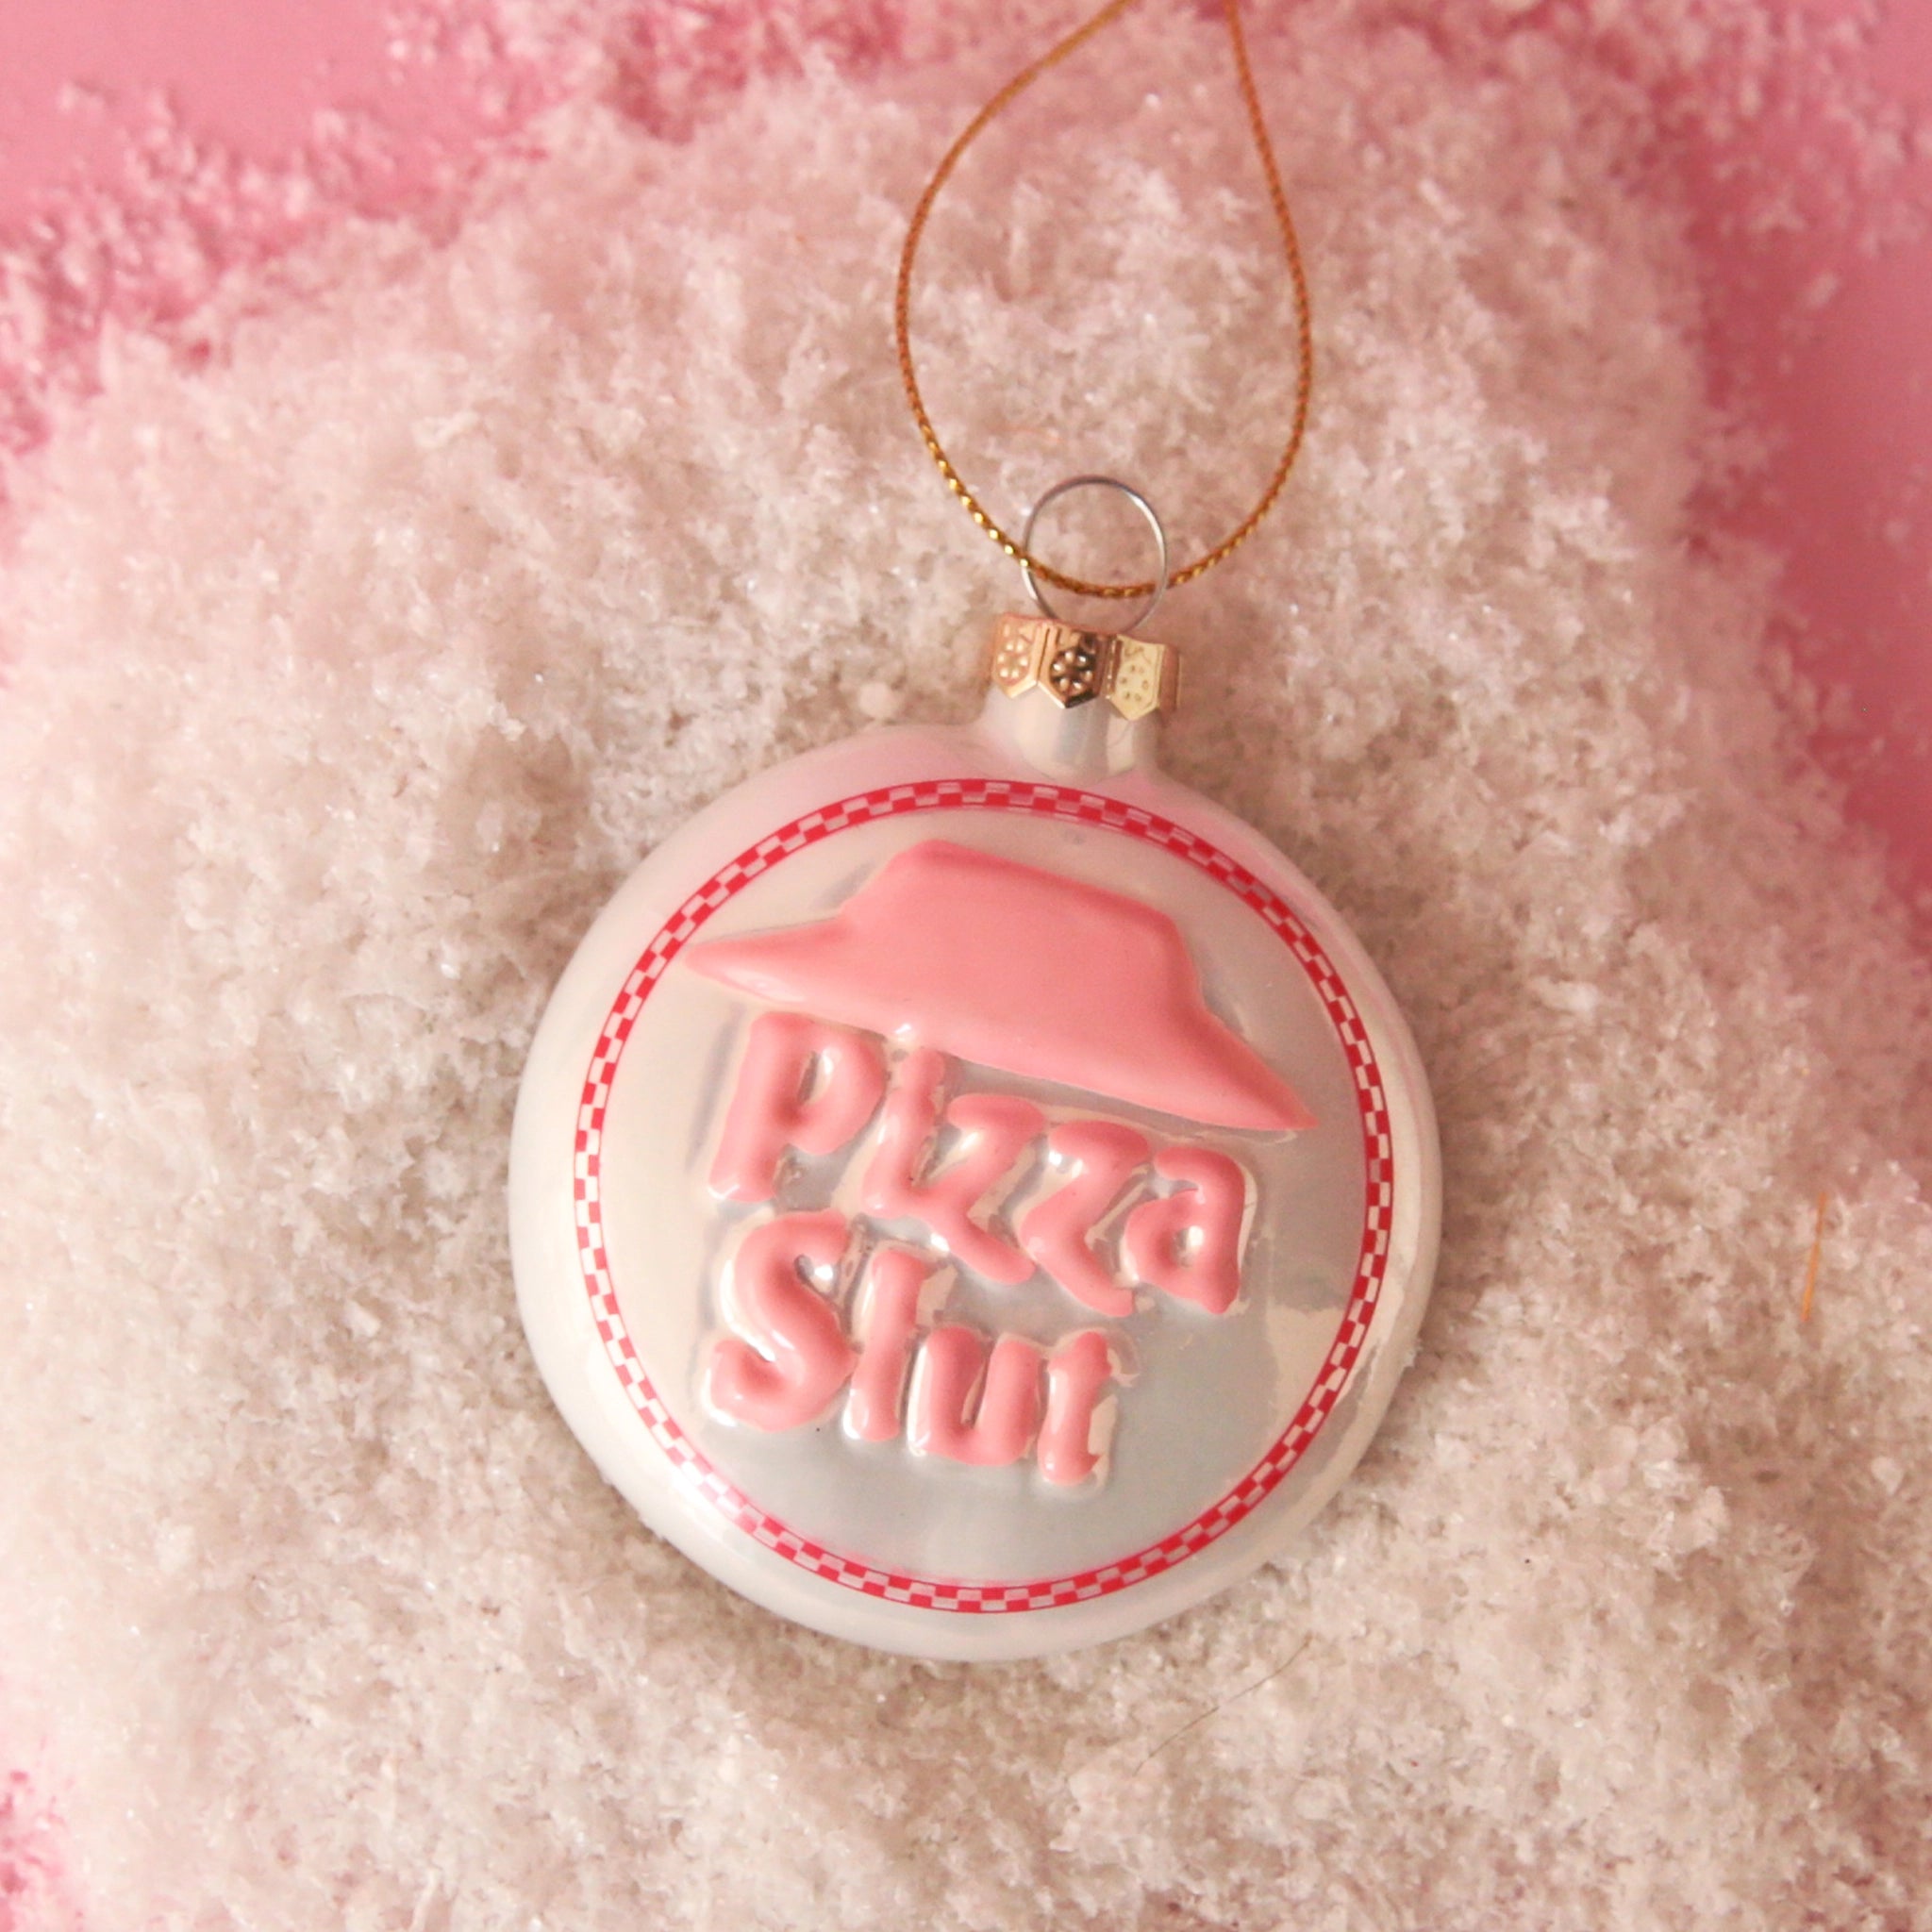 On a pink snowy background is a white and pink circle glass ornament that has text in the center that reads, "Pizza Slut". 